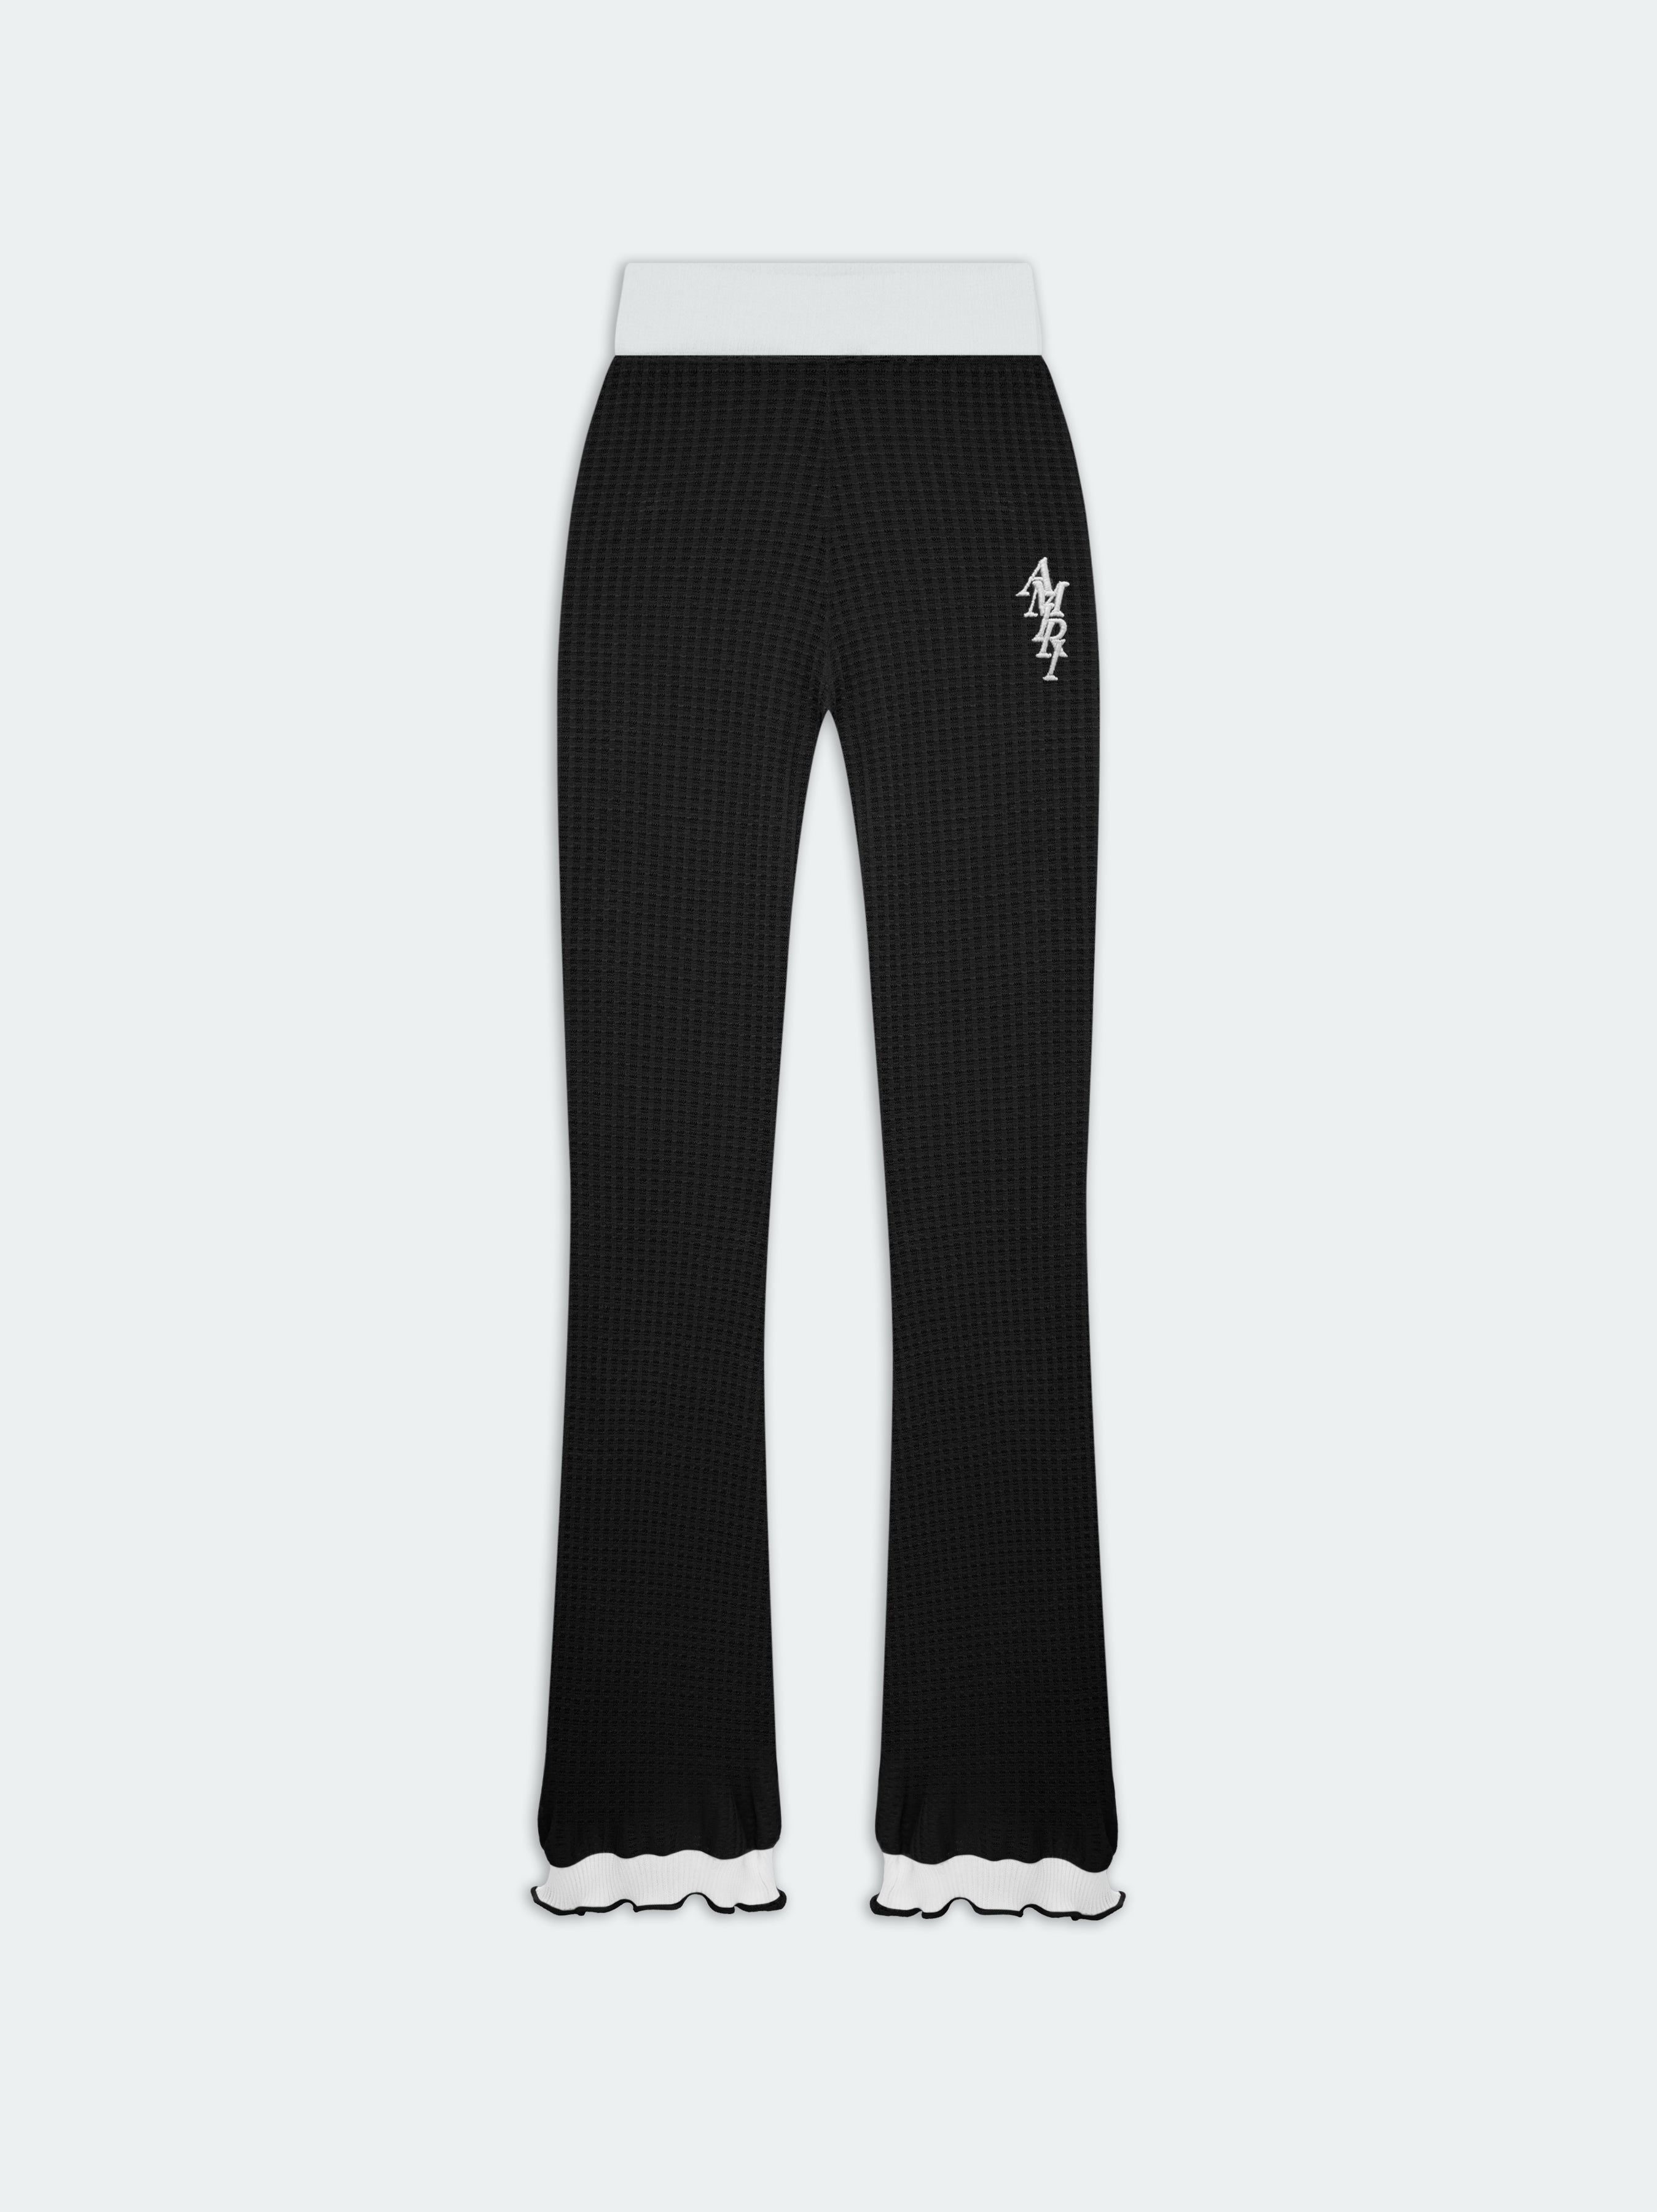 Product WOMEN - FLARE KNIT PANT - Black featured image